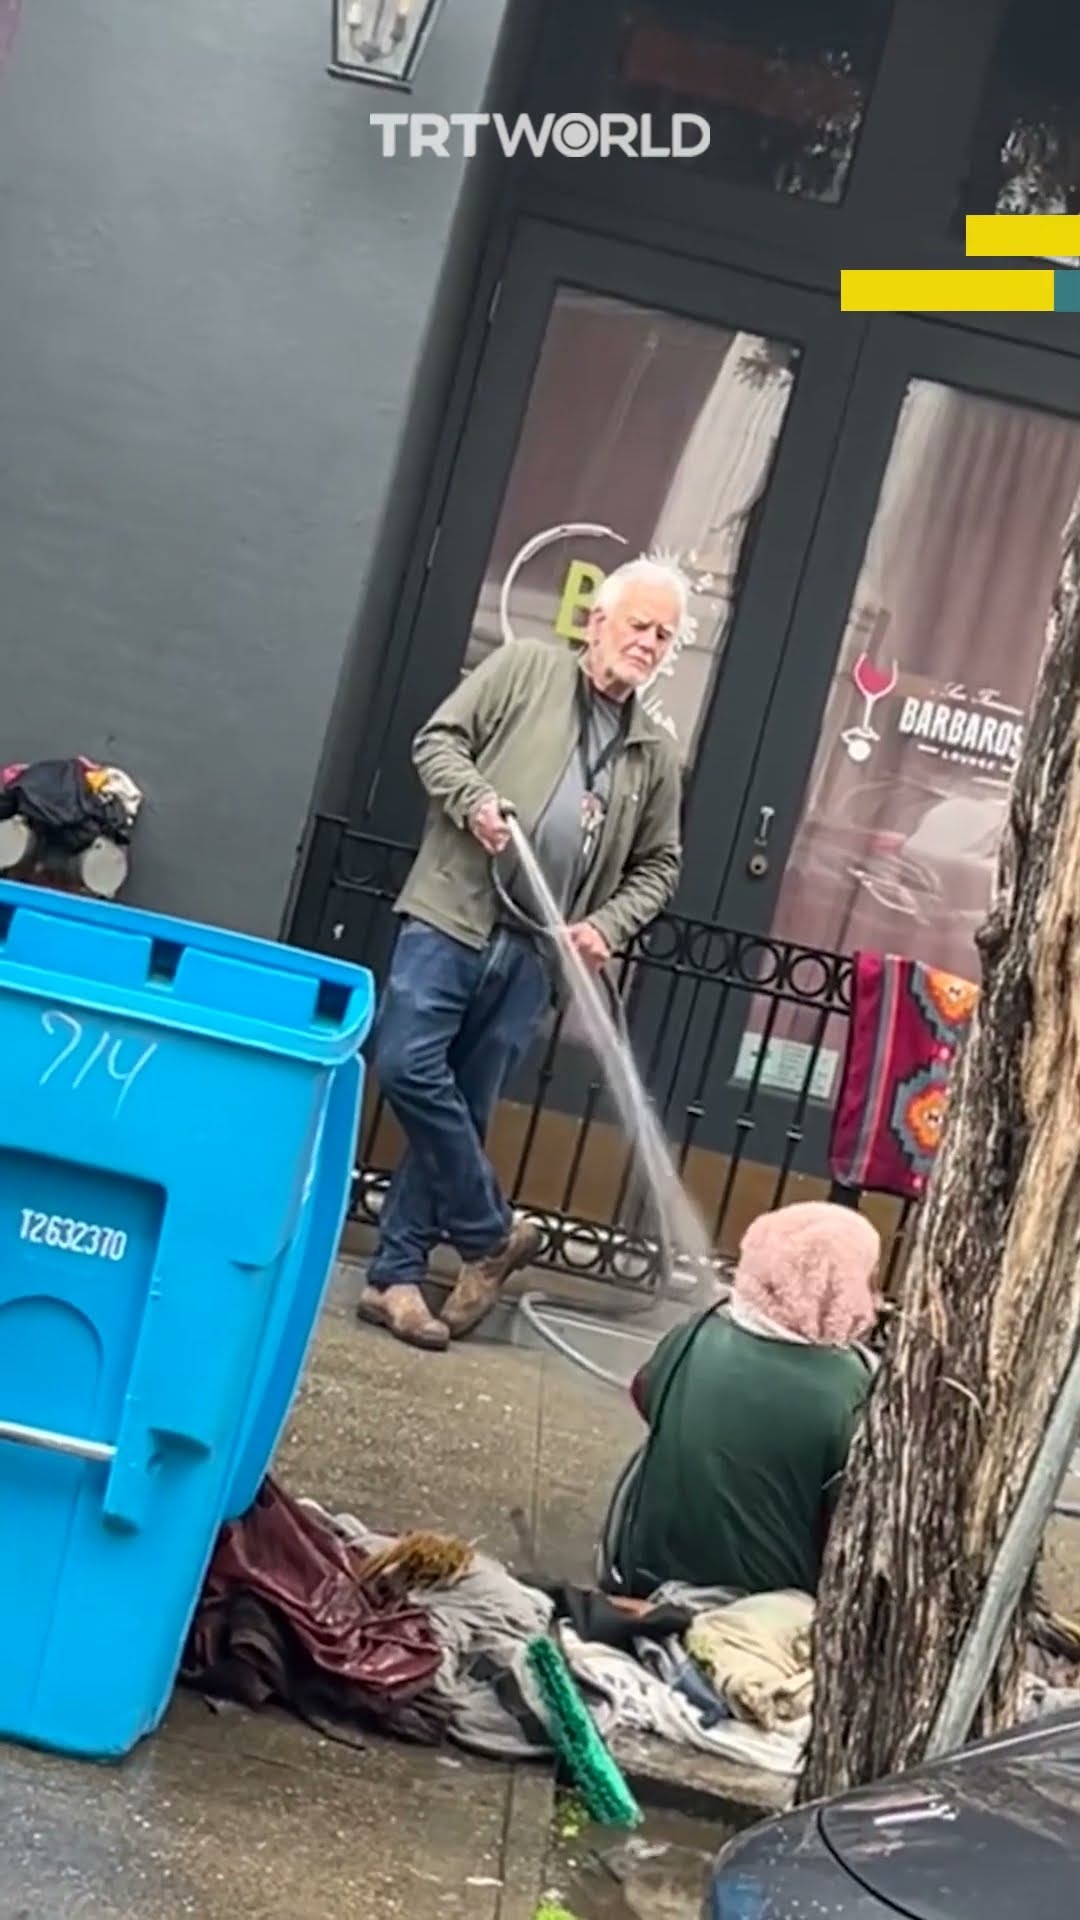 SAN FRANCİSCO ART GALLERY OWNER SPRAYS WATER AT HOMELESS WOMAN